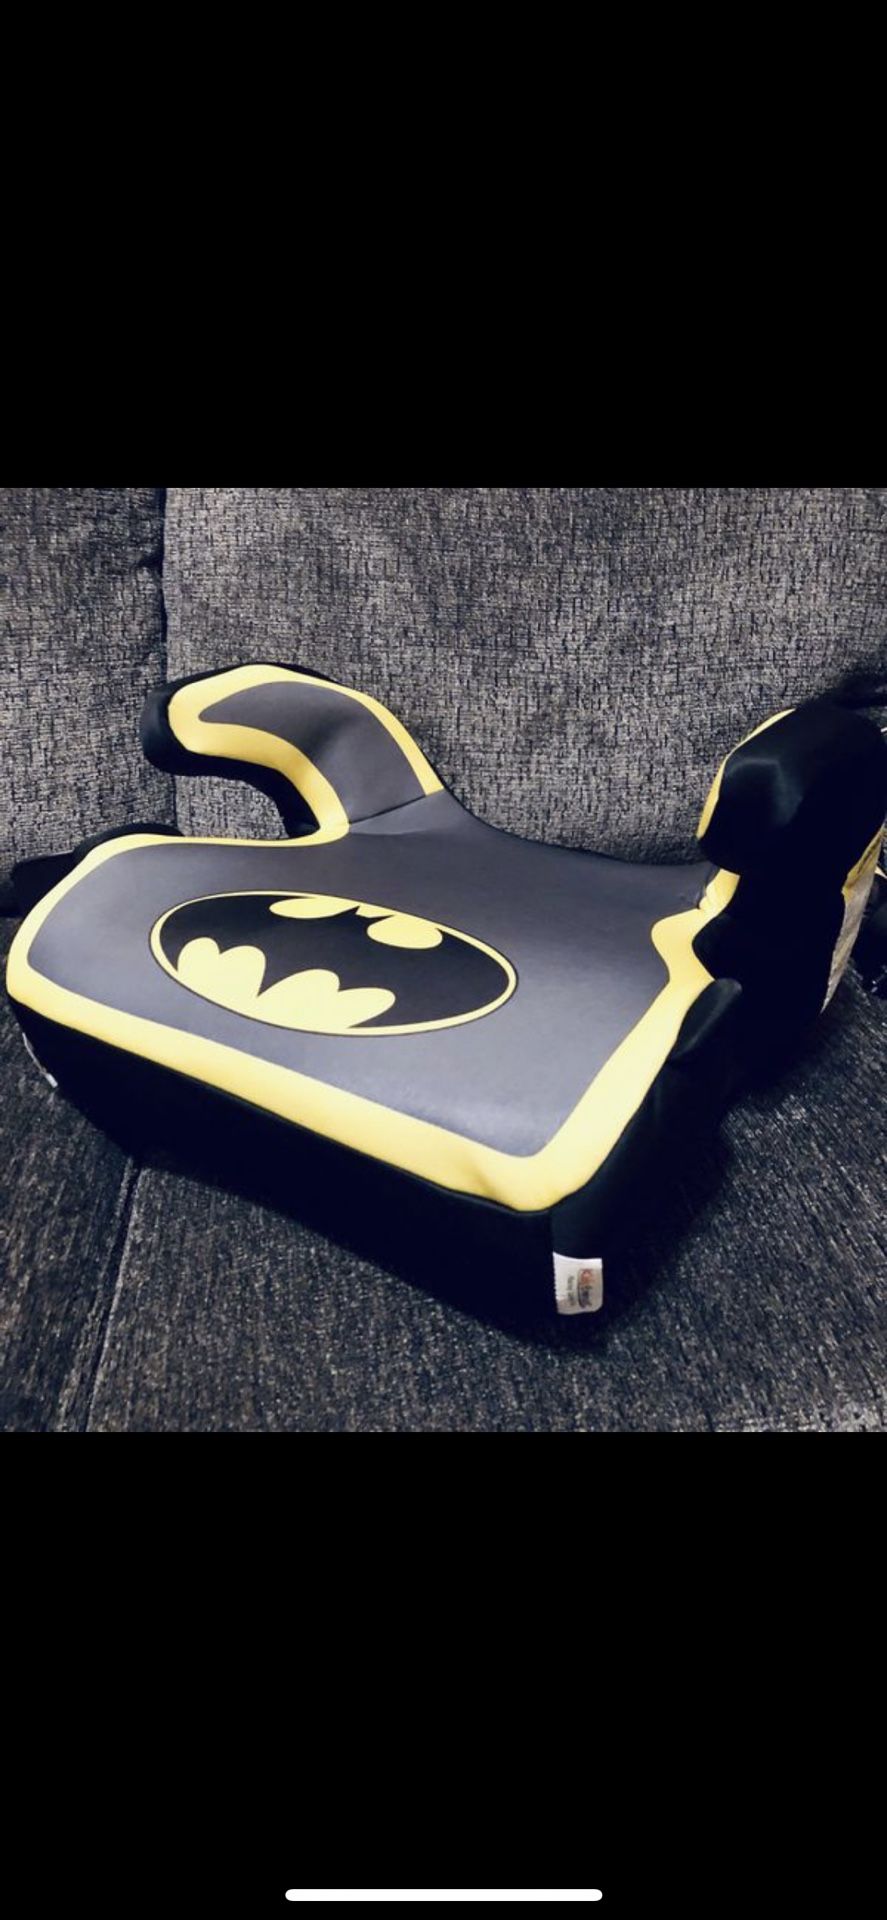 ⭐️New Batman backless booster seat. PICK UP BY ASHLAN AND TEMPERANCE IN CLOVIS